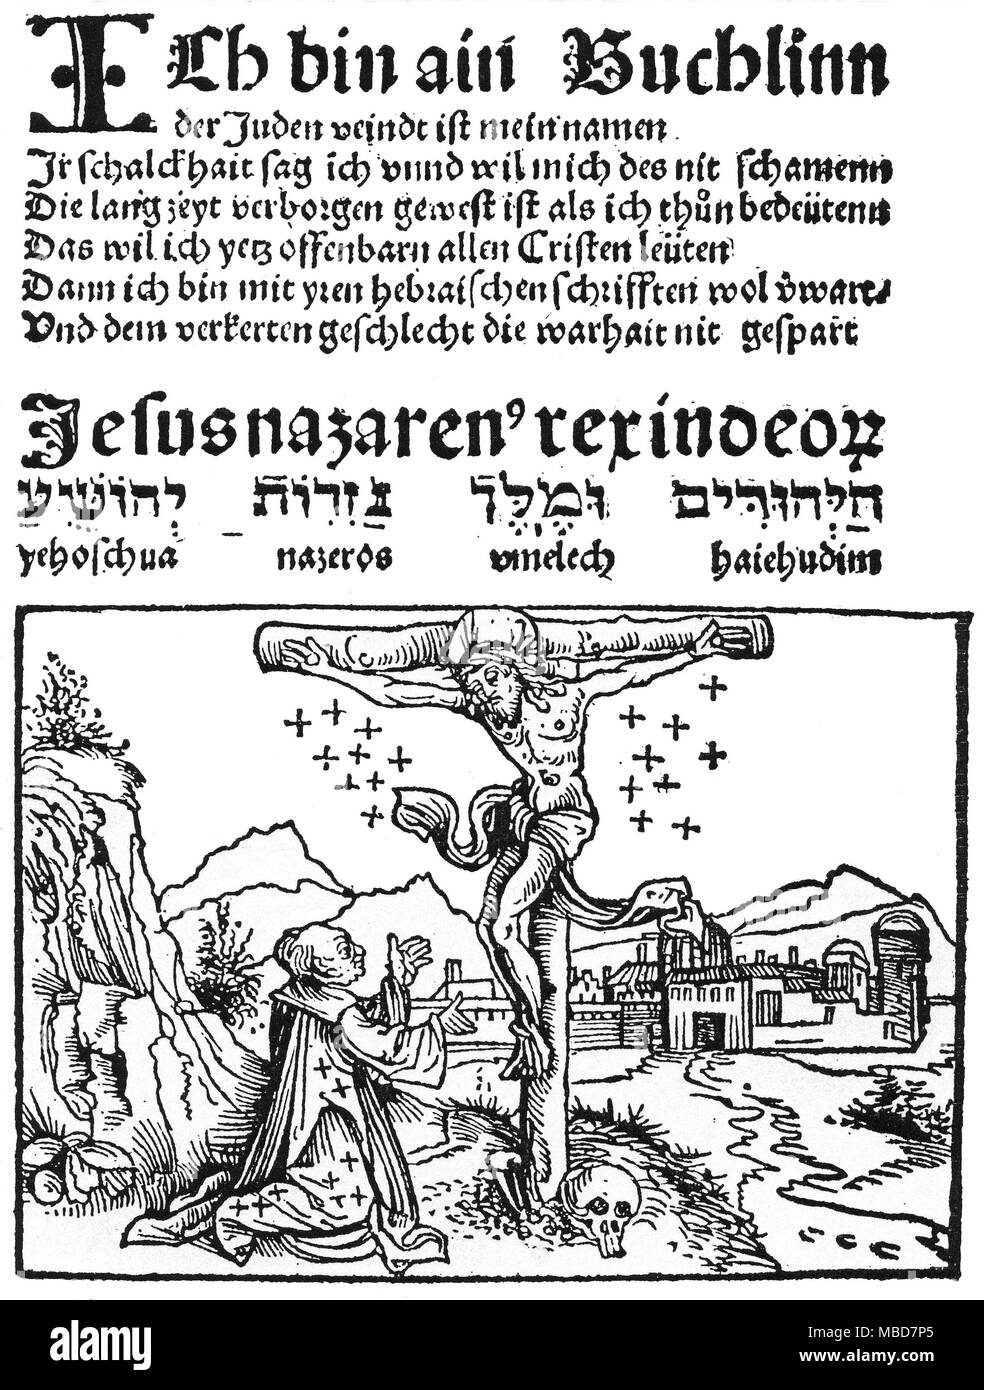 SYMBOLISM - JEWISH MYTHOLOGY - ALPHABETS Three versions of the acronym, INRI, said to have been written on a scroll above the crucified Christ. The text at the top is the Latin version Jesus Nazarenus Rex Iudeorum (Jesus the Nazarene, King of the Jews), the text below this is the Hebrew version of this, while the version at the bottom is the Romanized version of the Hebrew. From Pfefferkorn, Der Juden Feind, 1509, reproduced in Georg Liebe, Das Judentum in der deutschen Vergangenheit, 1903. Stock Photo